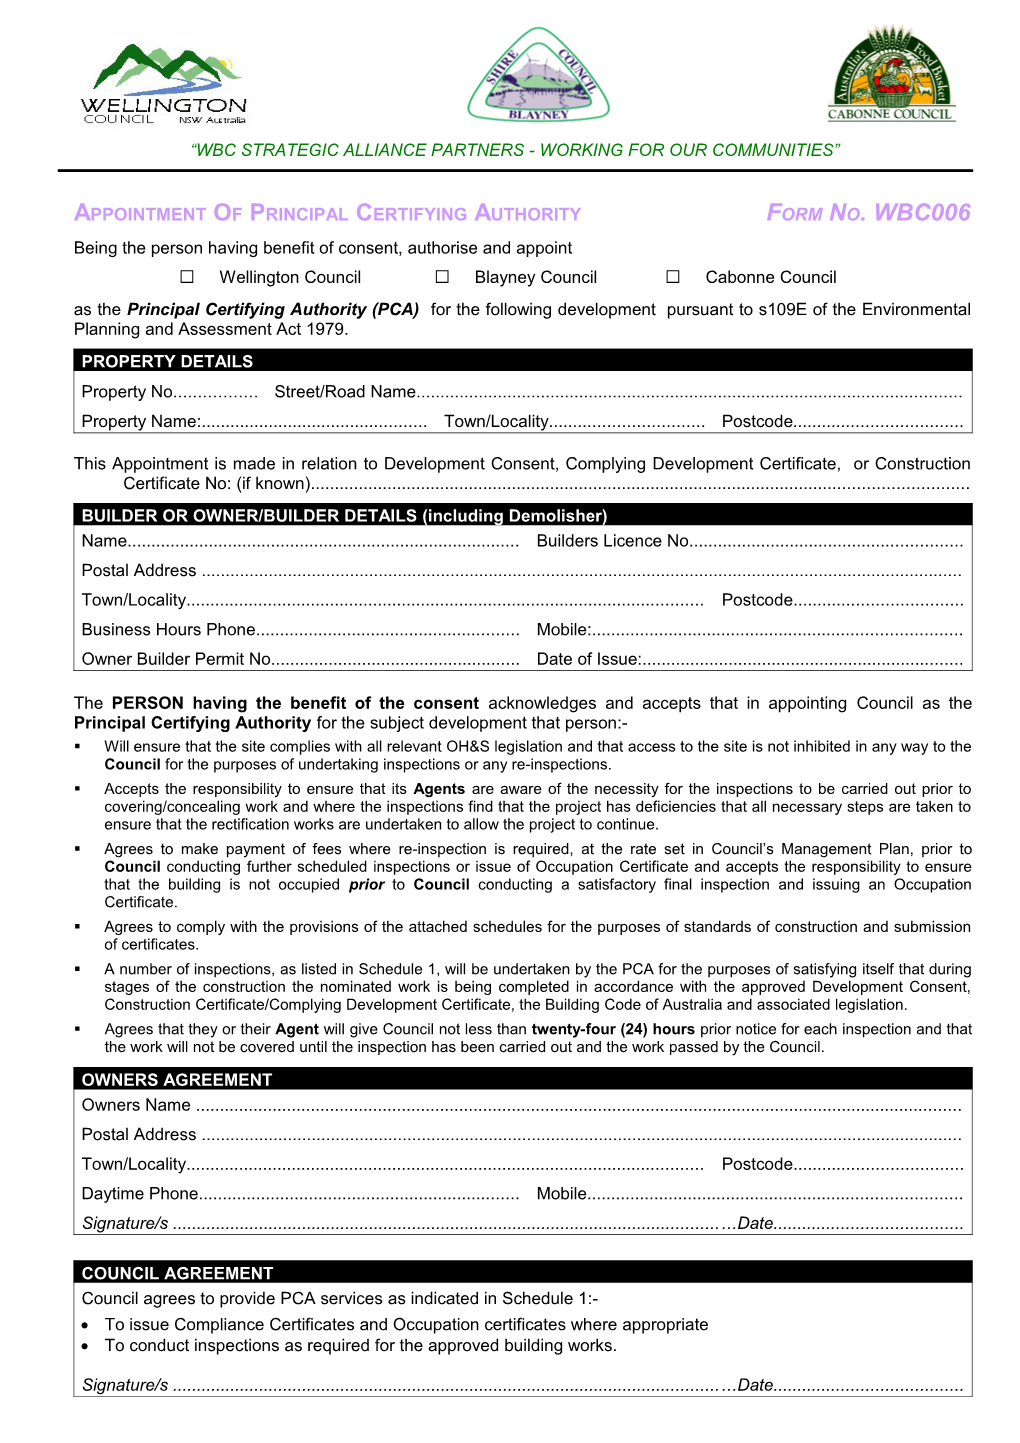 Appointment of Principal Certifying Authorityform No. WBC006